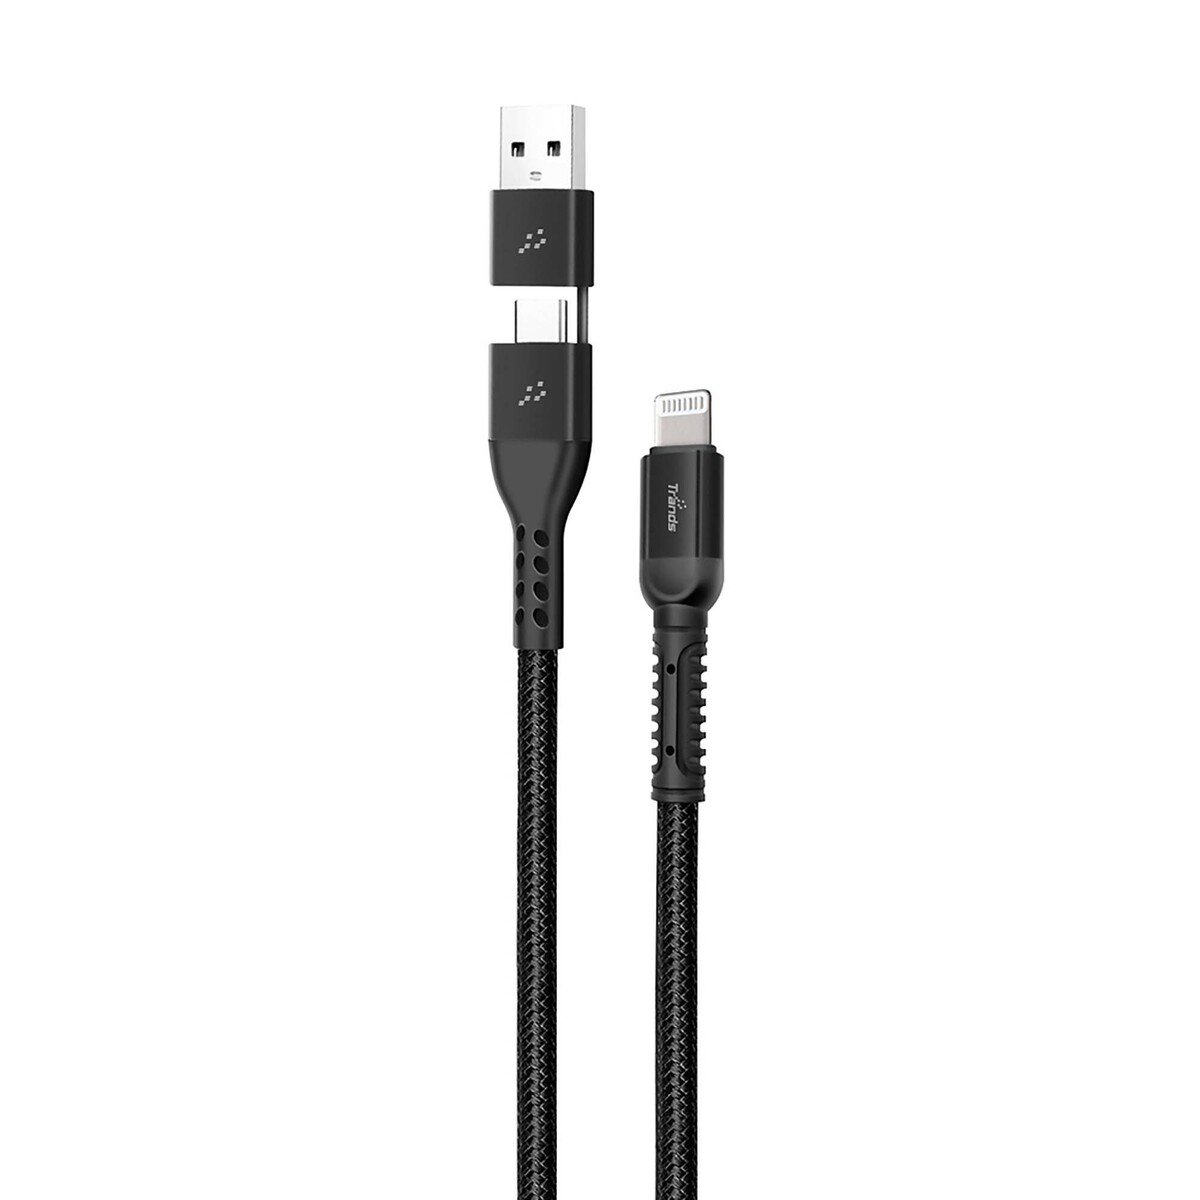 Trands 2 in 1 18W Lightning to Type-C and USB CableCA558, Black